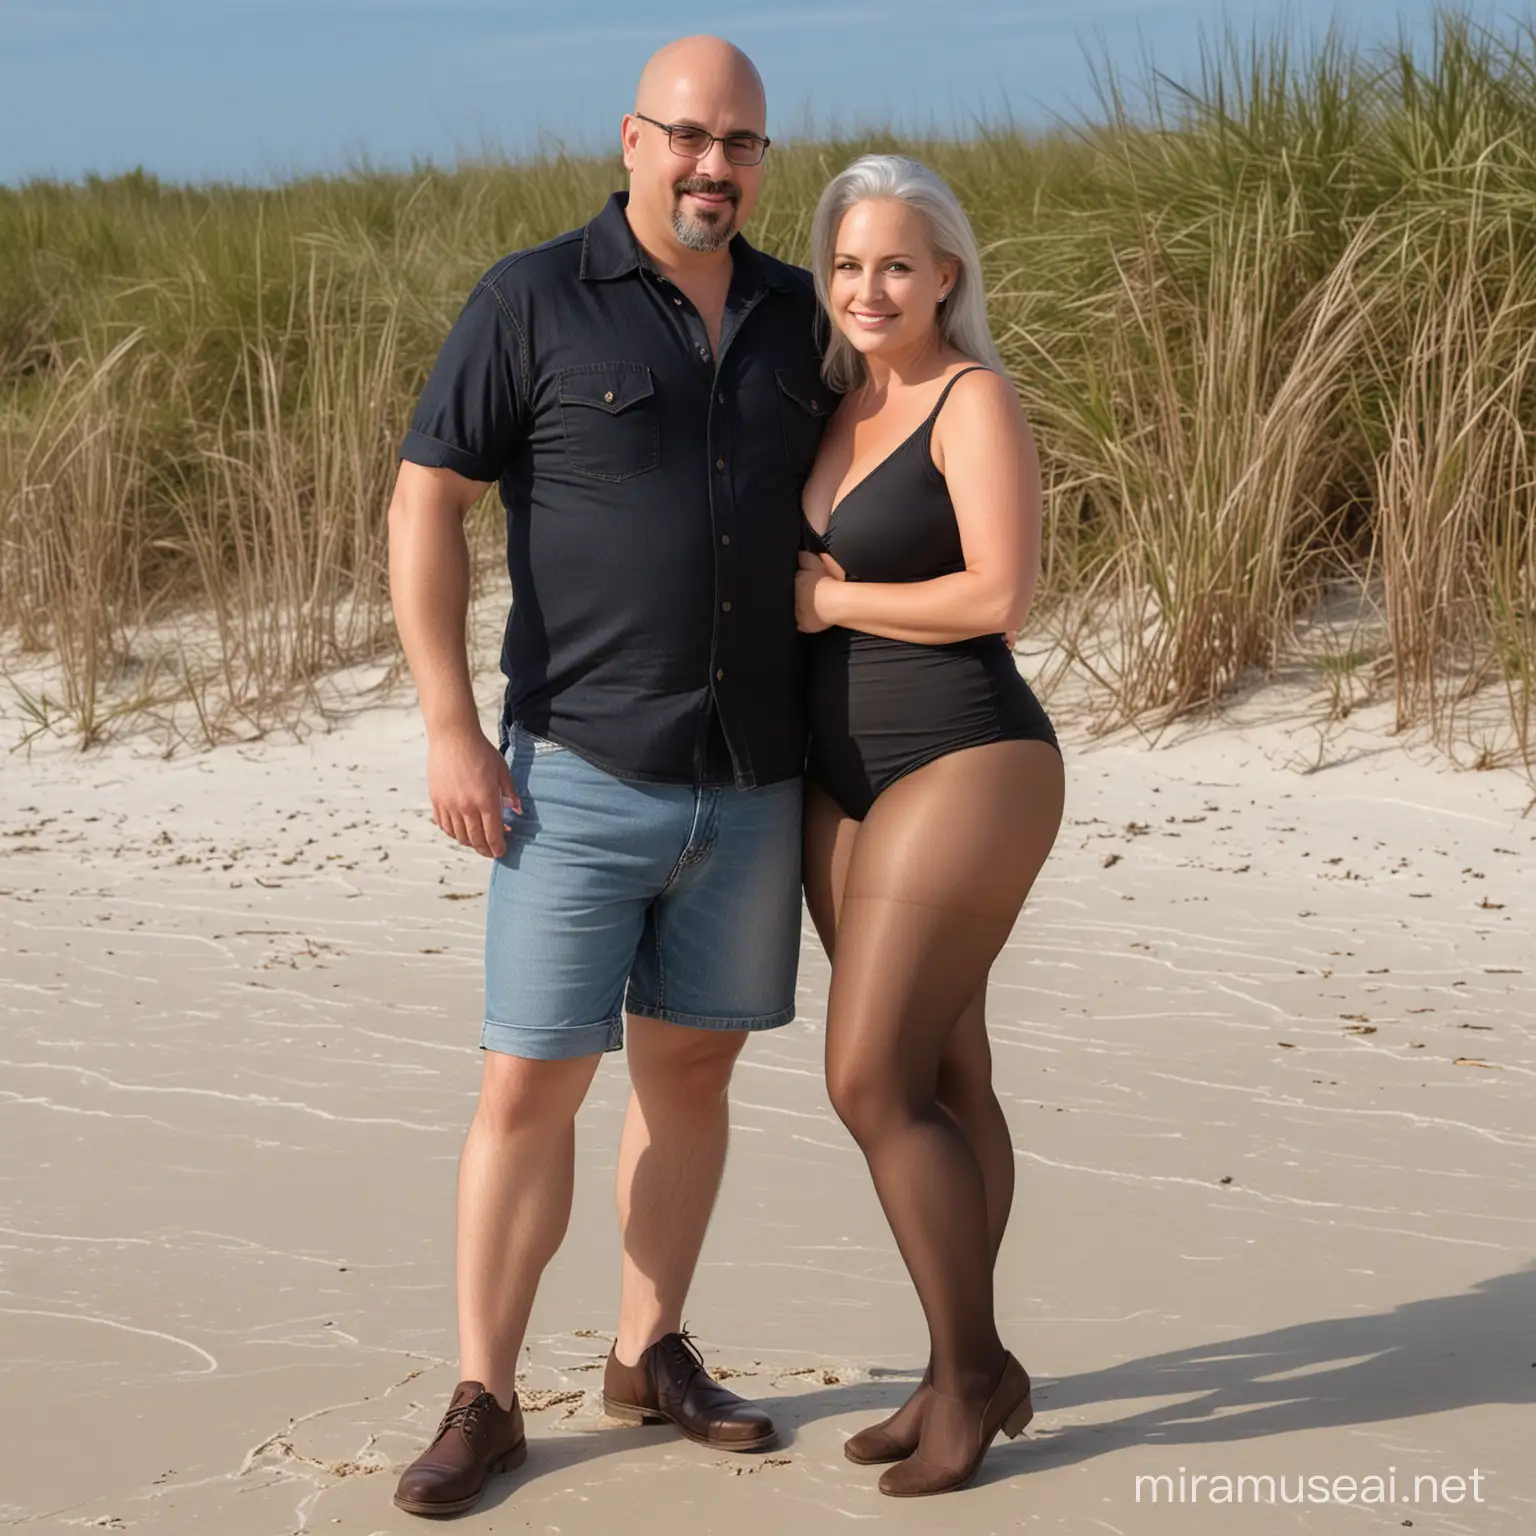 Pantyhose couple, chubby husband and thin wife, wearing shiny dark brown pantyhose nylons tights, denim jean shorts, husband chubby, 35 years old bald, small goatee. black button down shirt. Wife silver hair, 55 years old, large boobs, grey tank top, wearing shiny dark brown pantyhose, standing on sandy florida beach